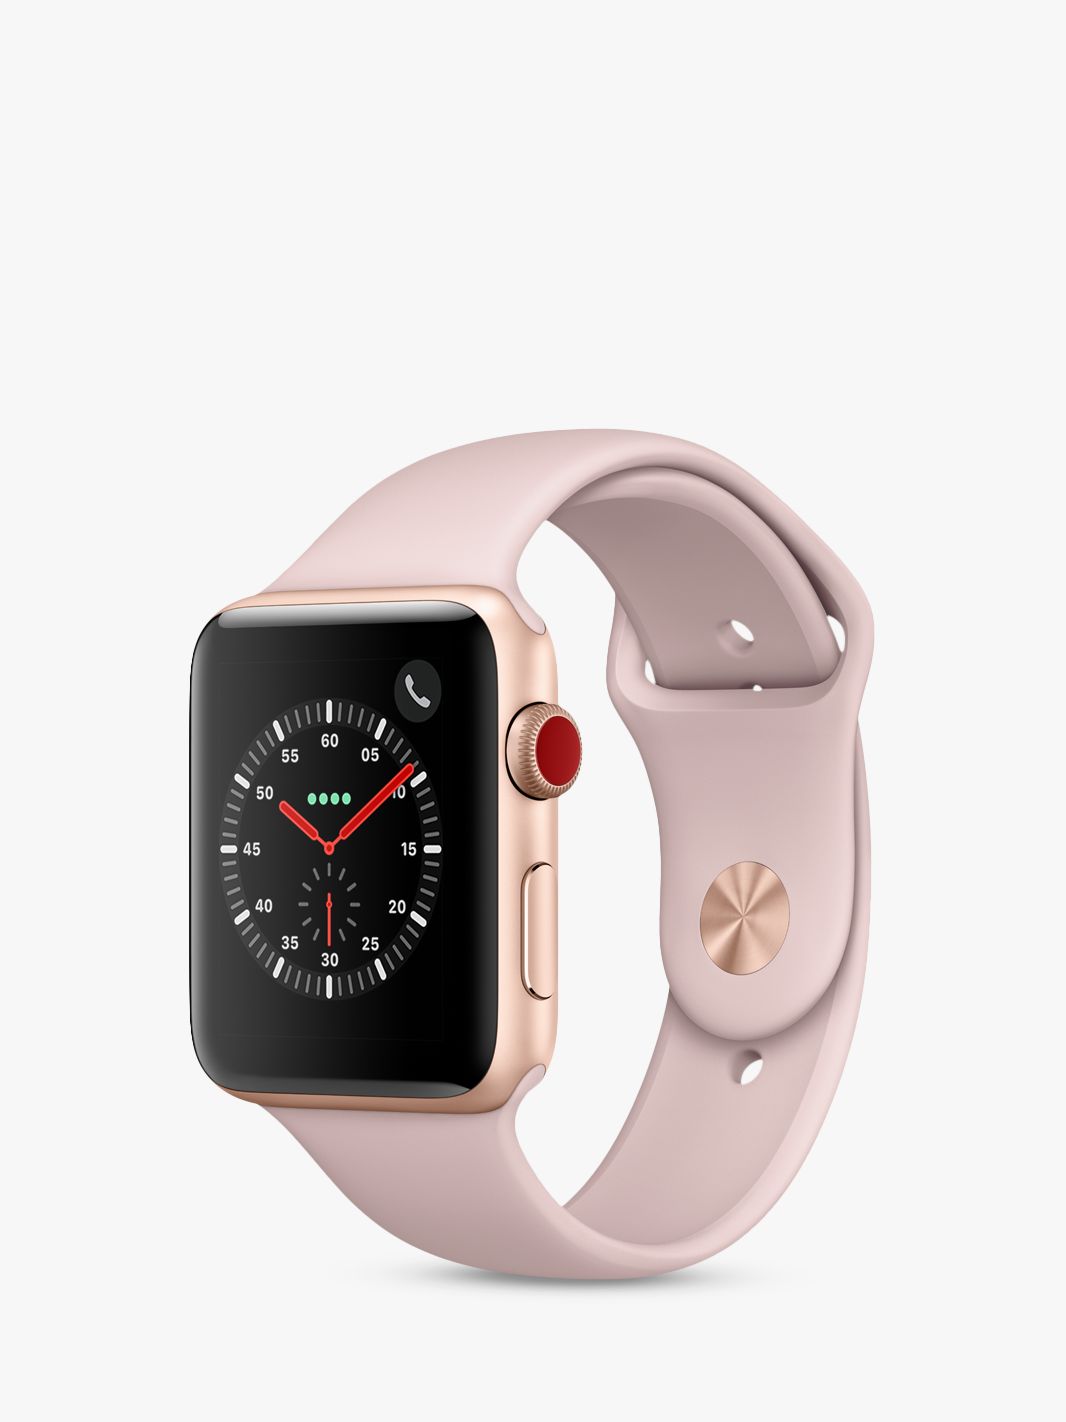 Apple Watch Series 3, GPS and Cellular, 42mm Gold Aluminium Case with Sport Band loop, Pink Sand